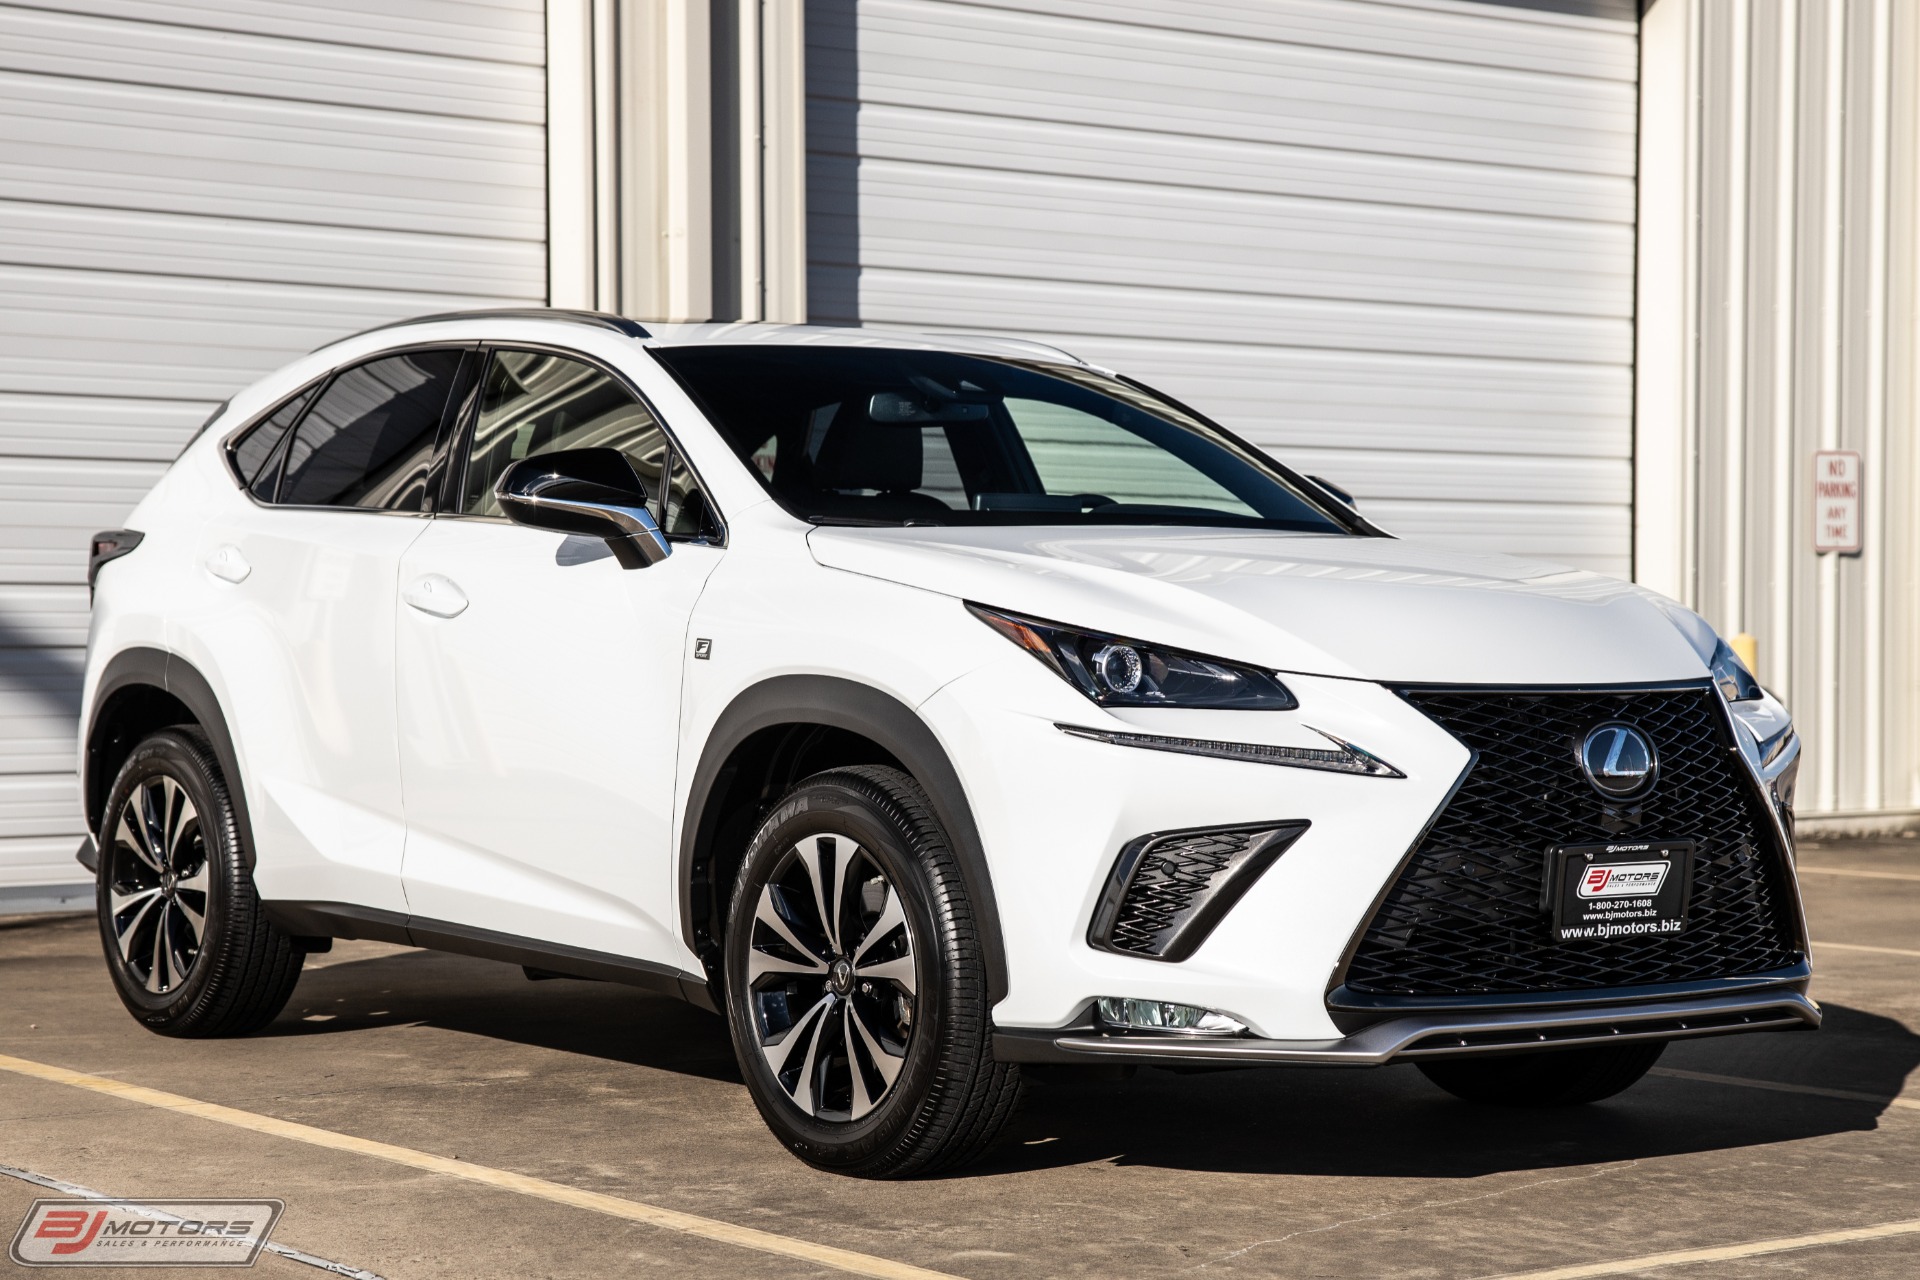 Used 2020 Lexus NX 300 F SPORT For Sale Special Pricing BJ Motors 